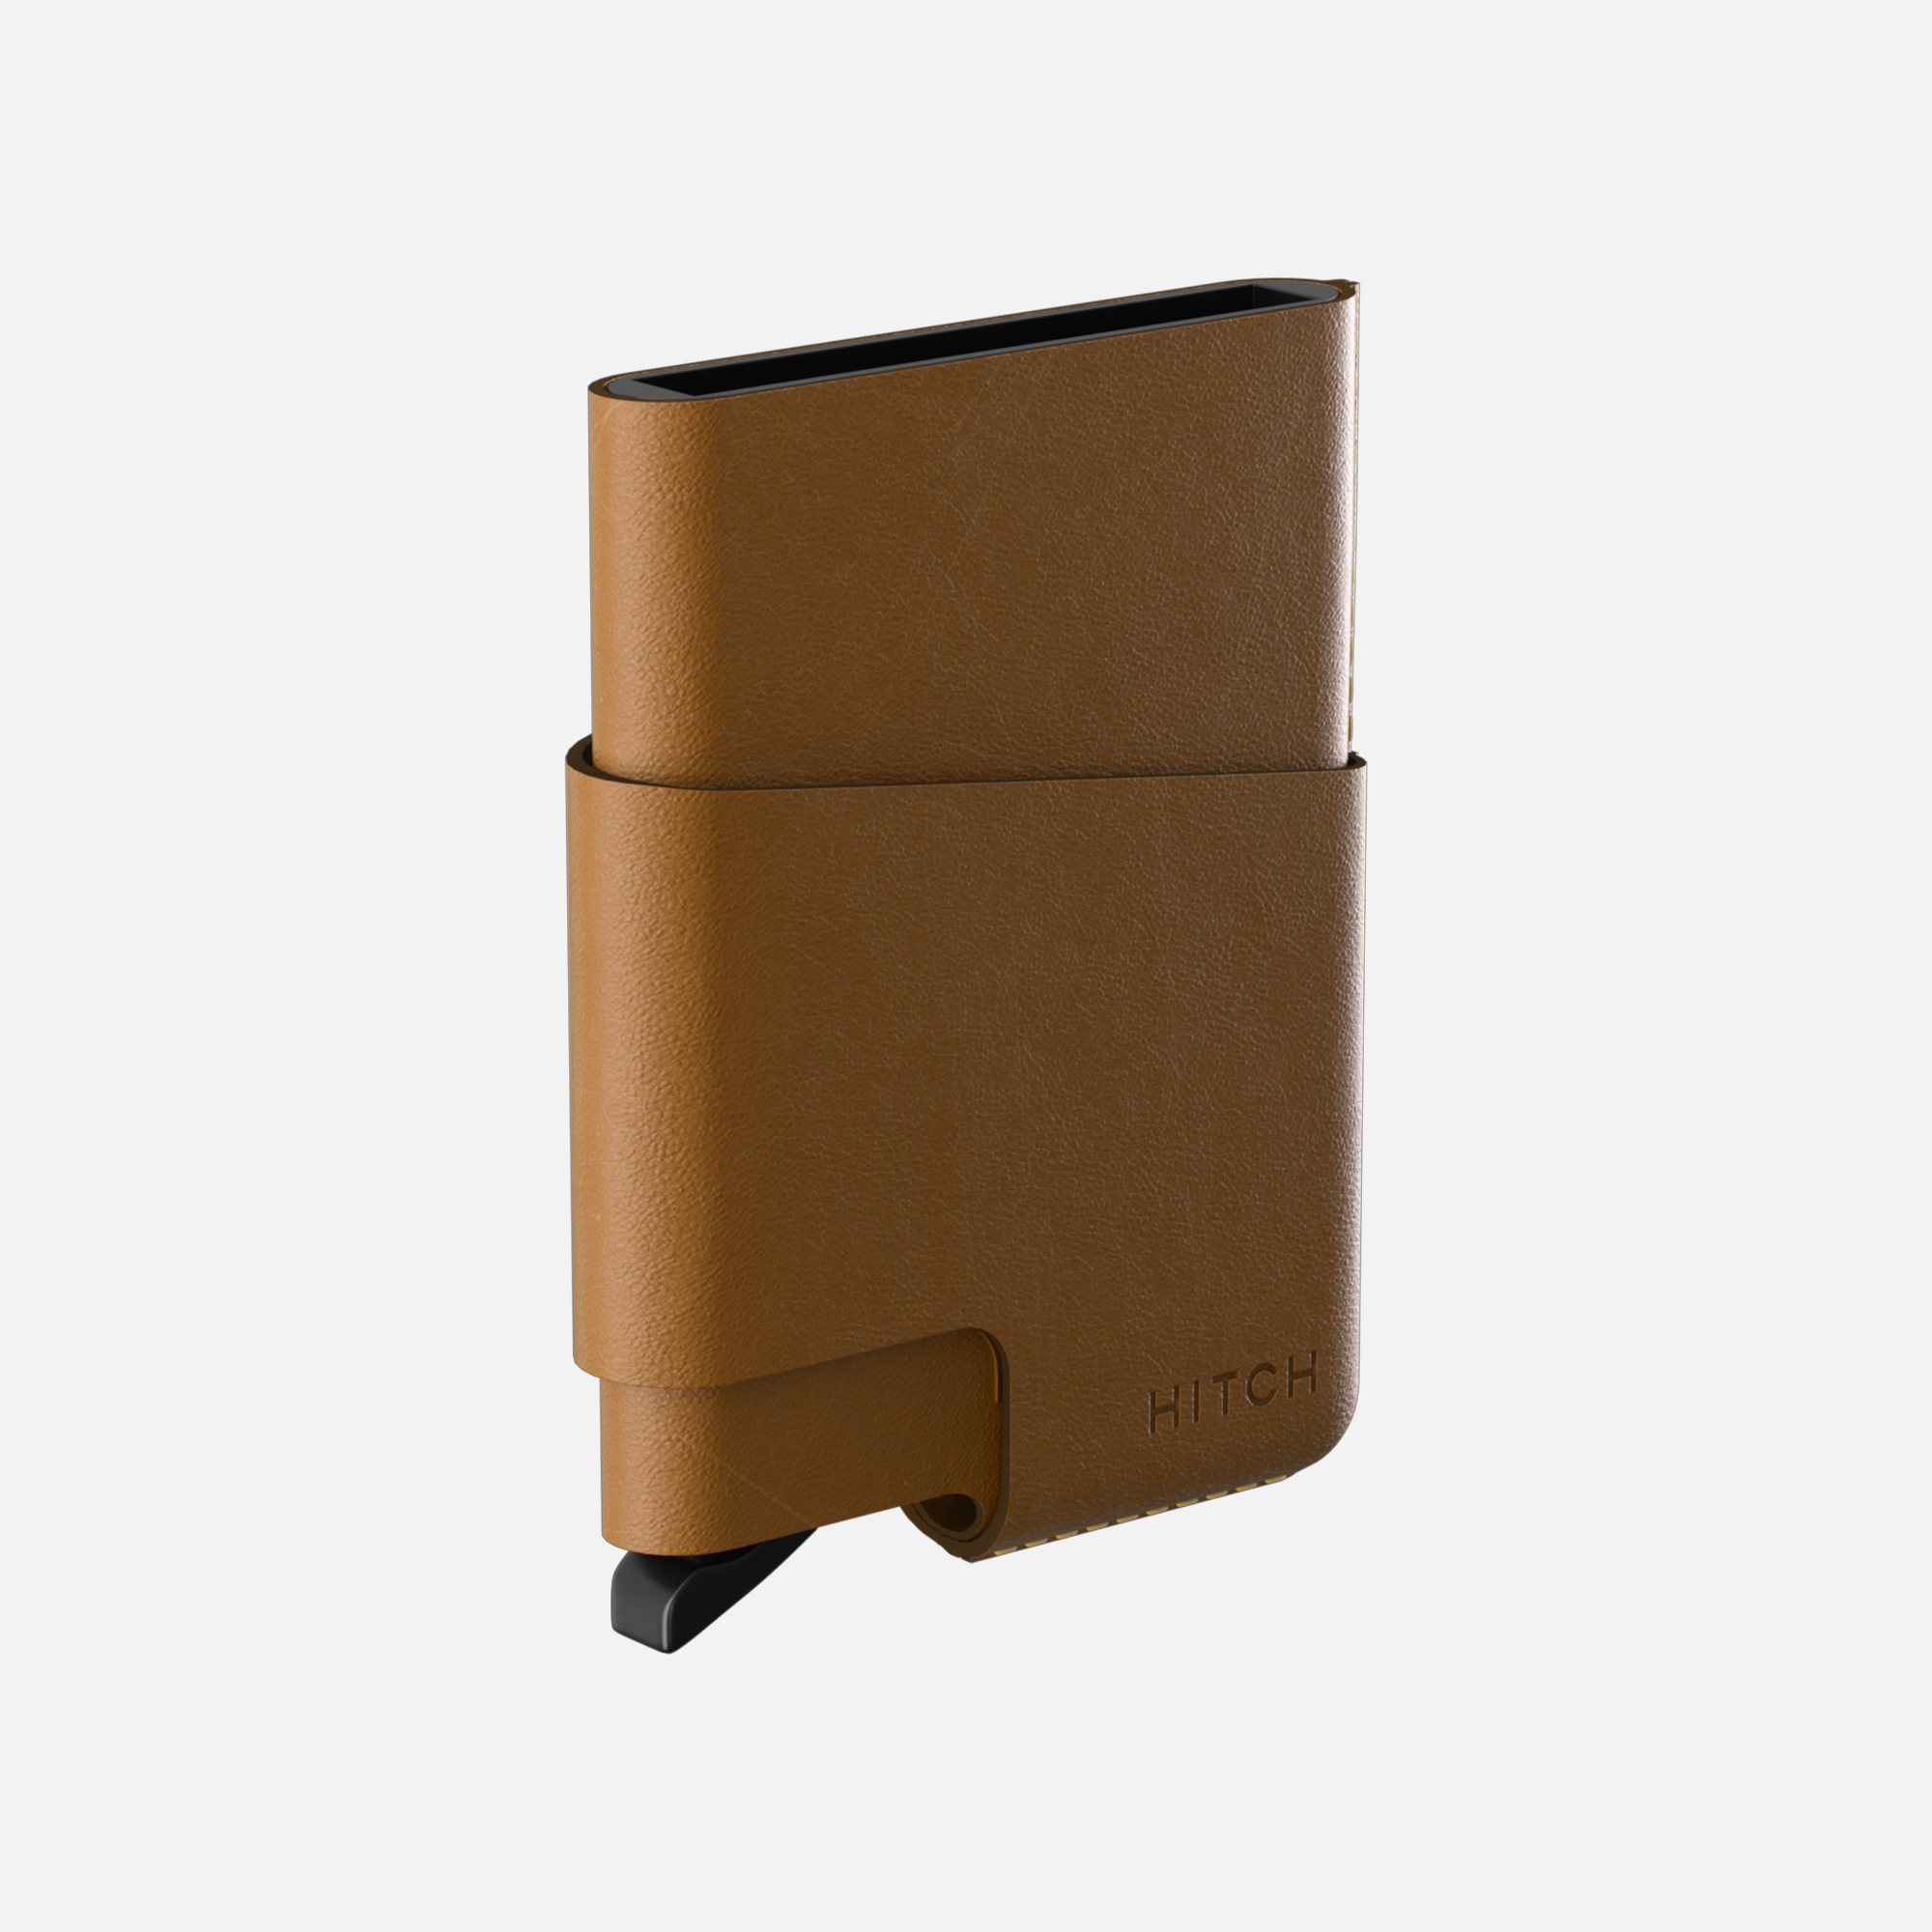 Brown leather smartphone case and HITCH branding on white background.